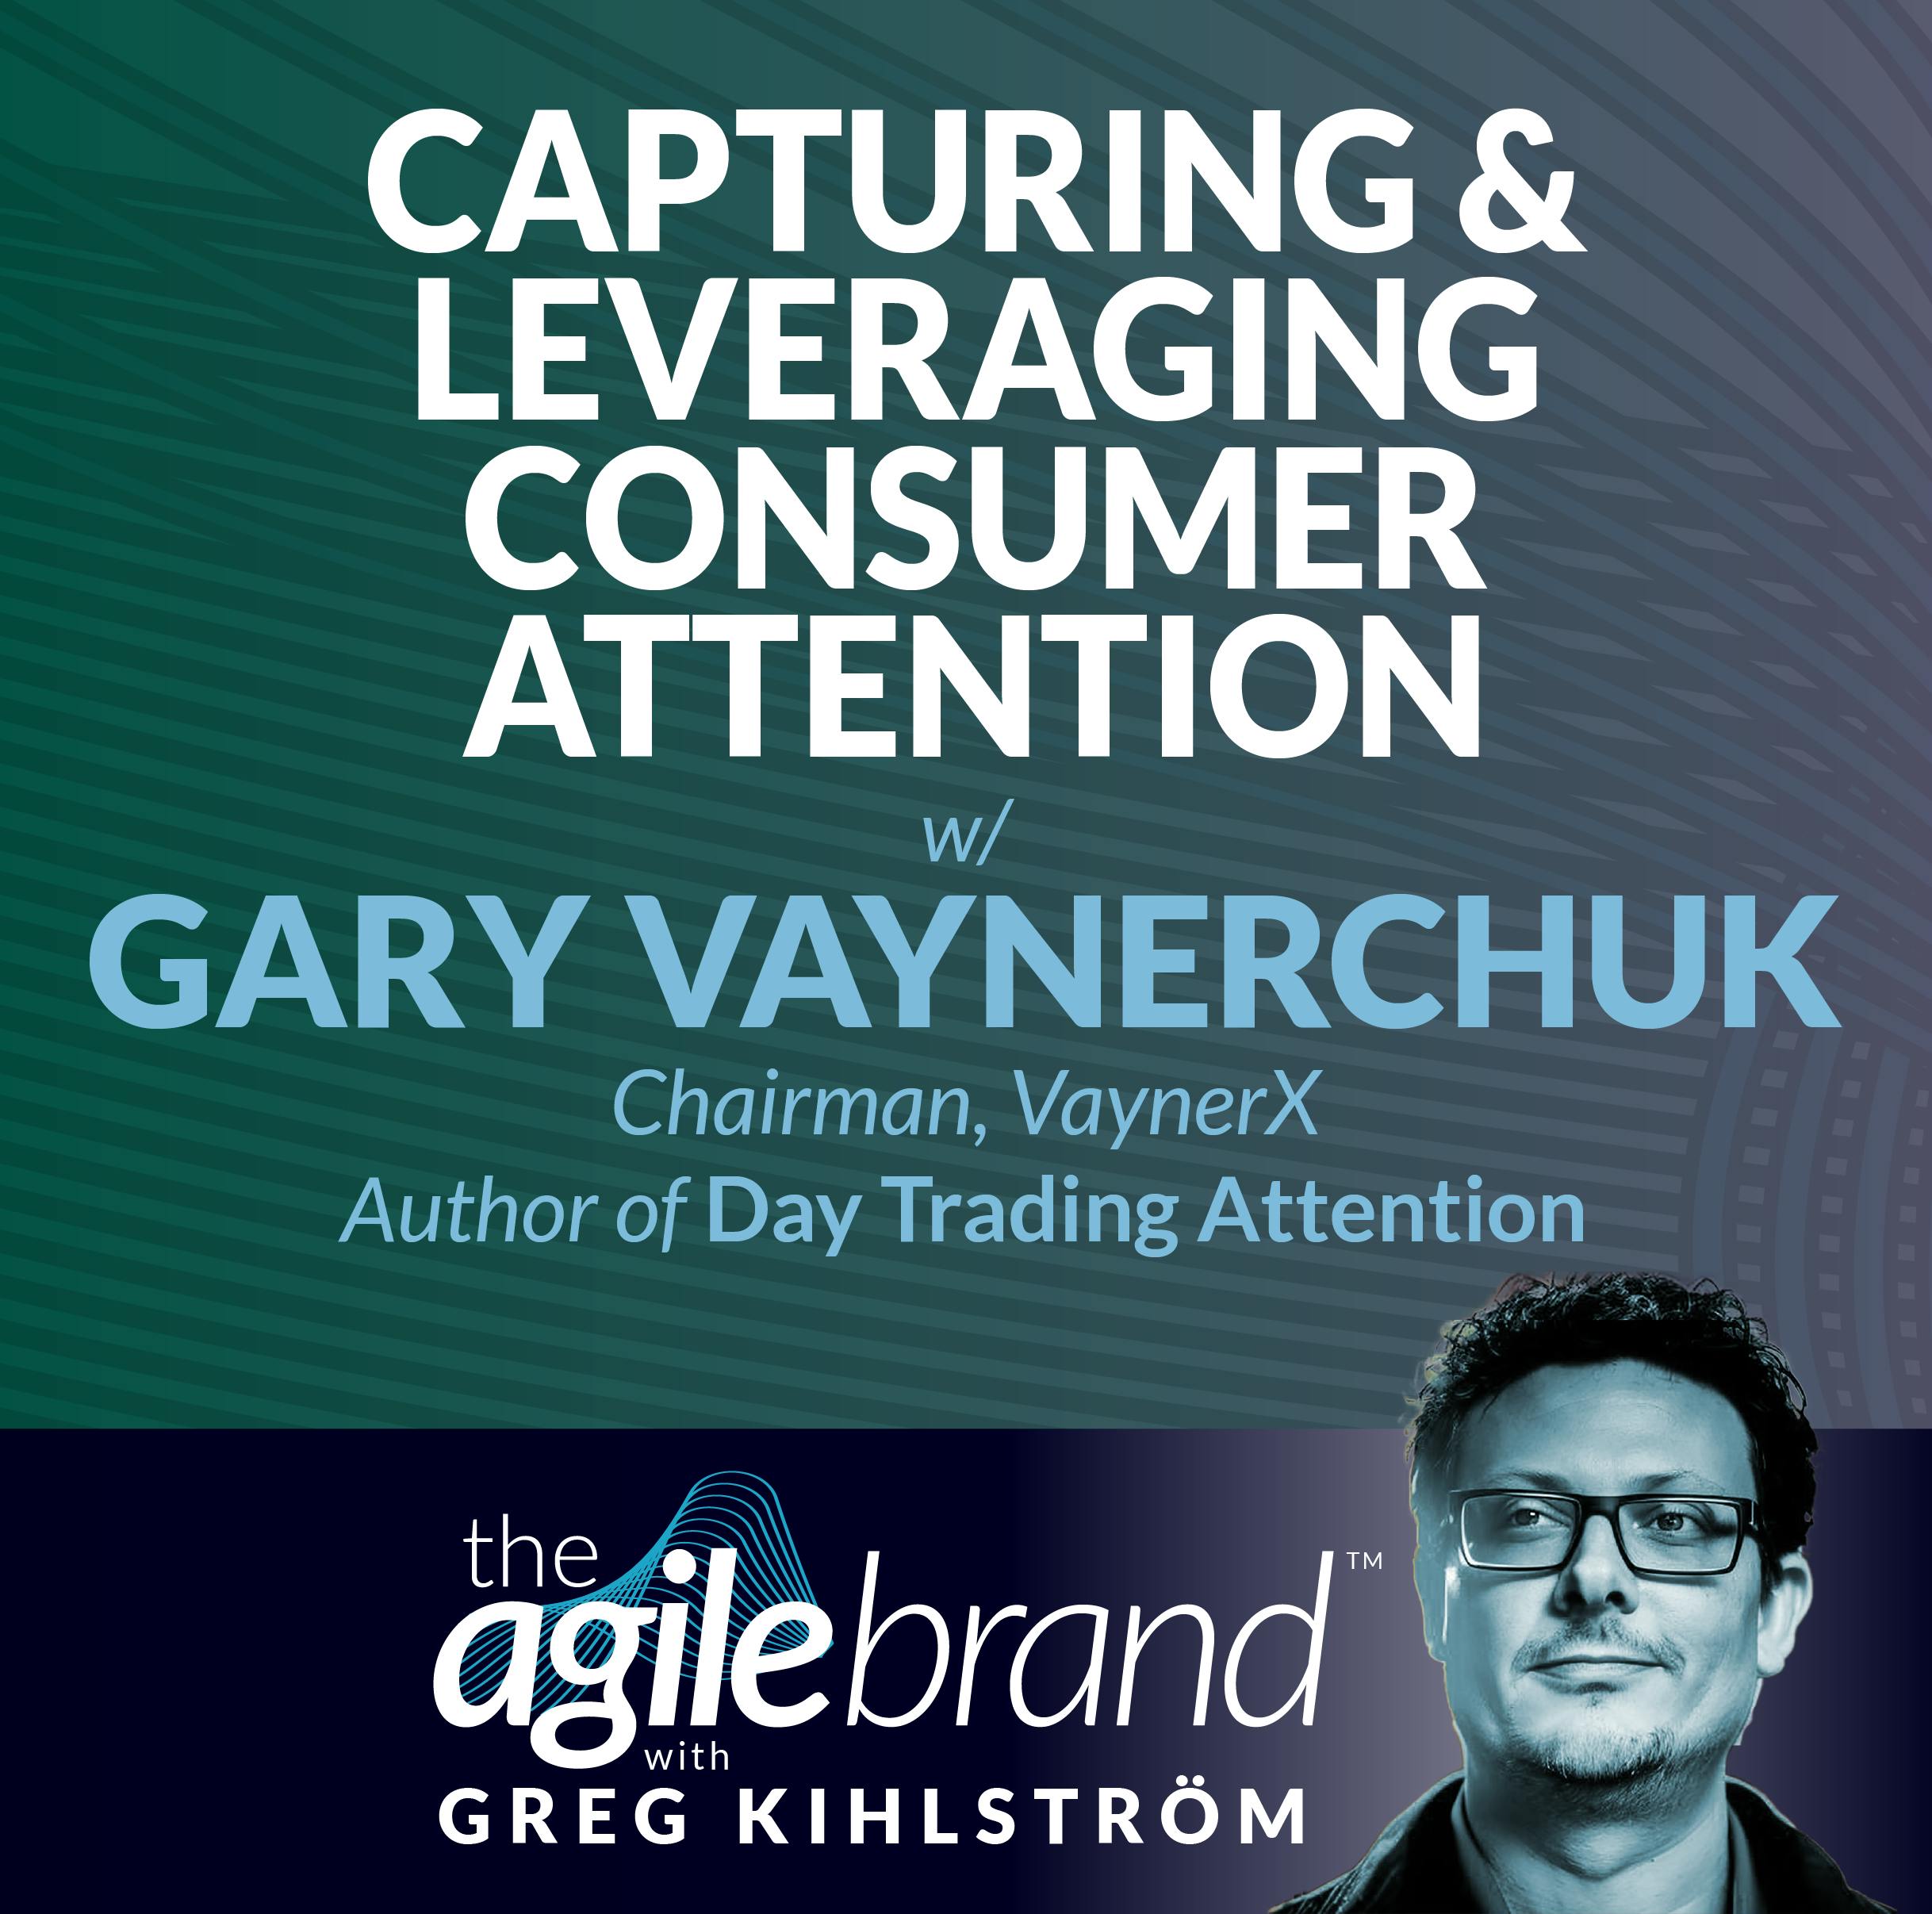 #524: Gary Vaynerchuk on capturing and leveraging consumer attention